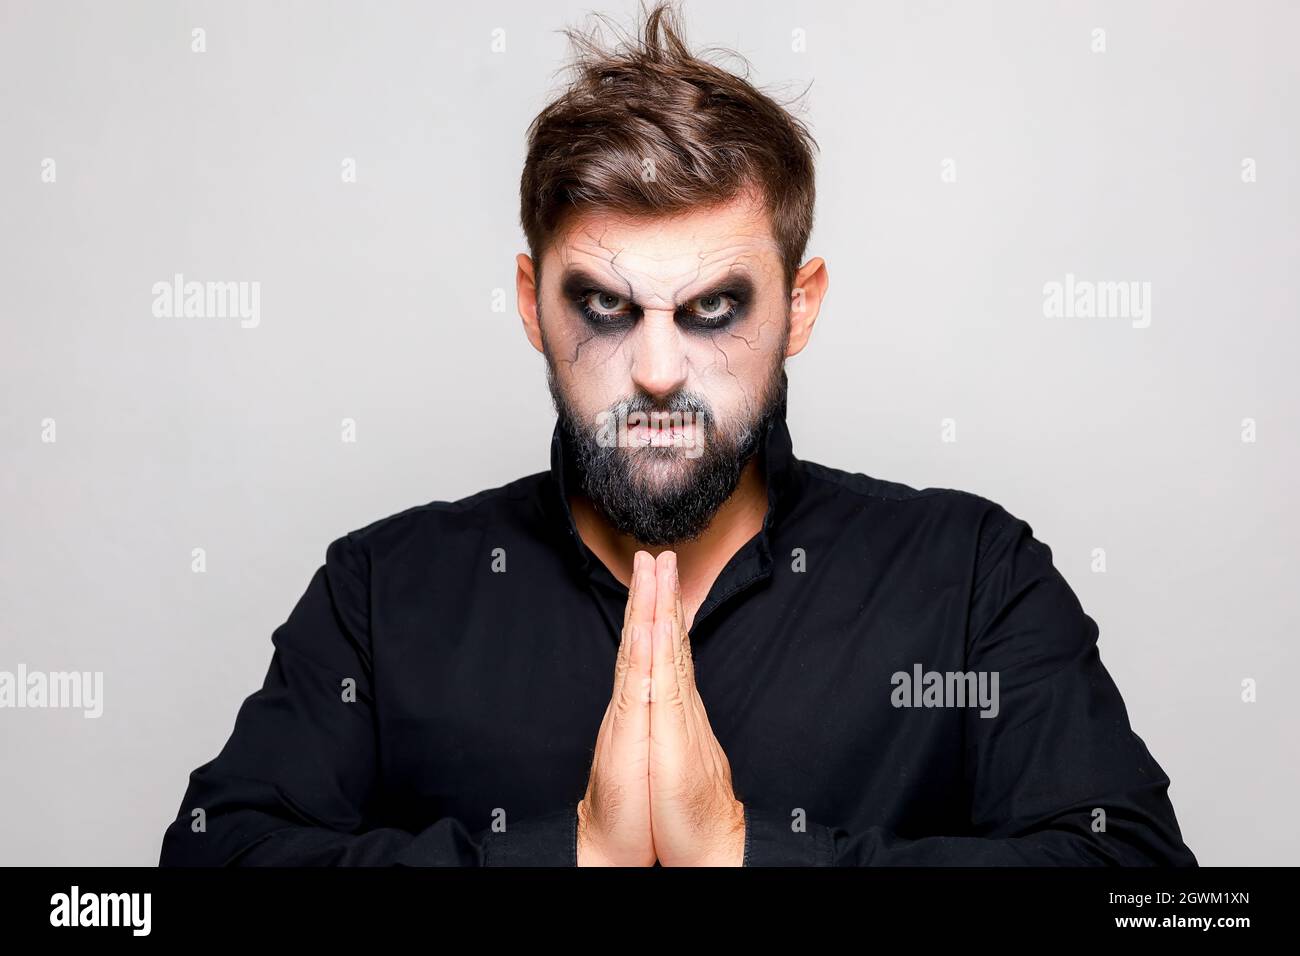 Scary undead-style makeup for Halloween on a bearded man who shows gestures  Stock Photo - Alamy